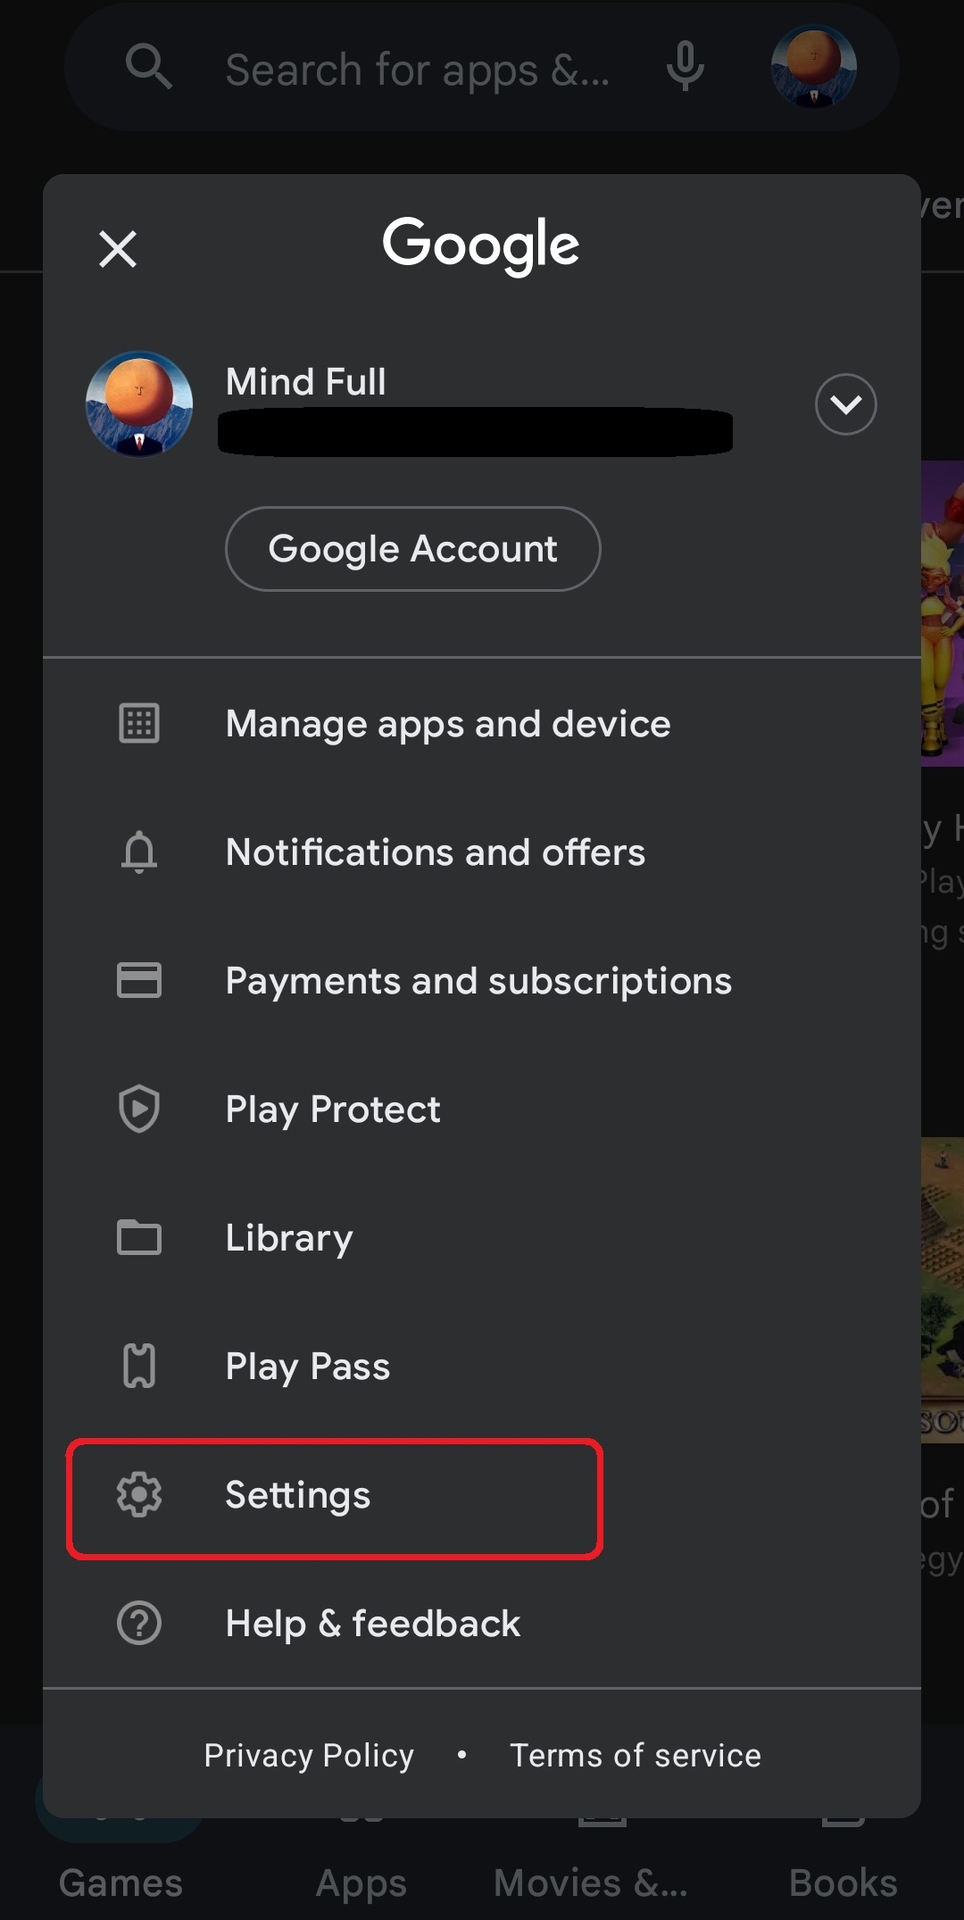 How to change country in google play